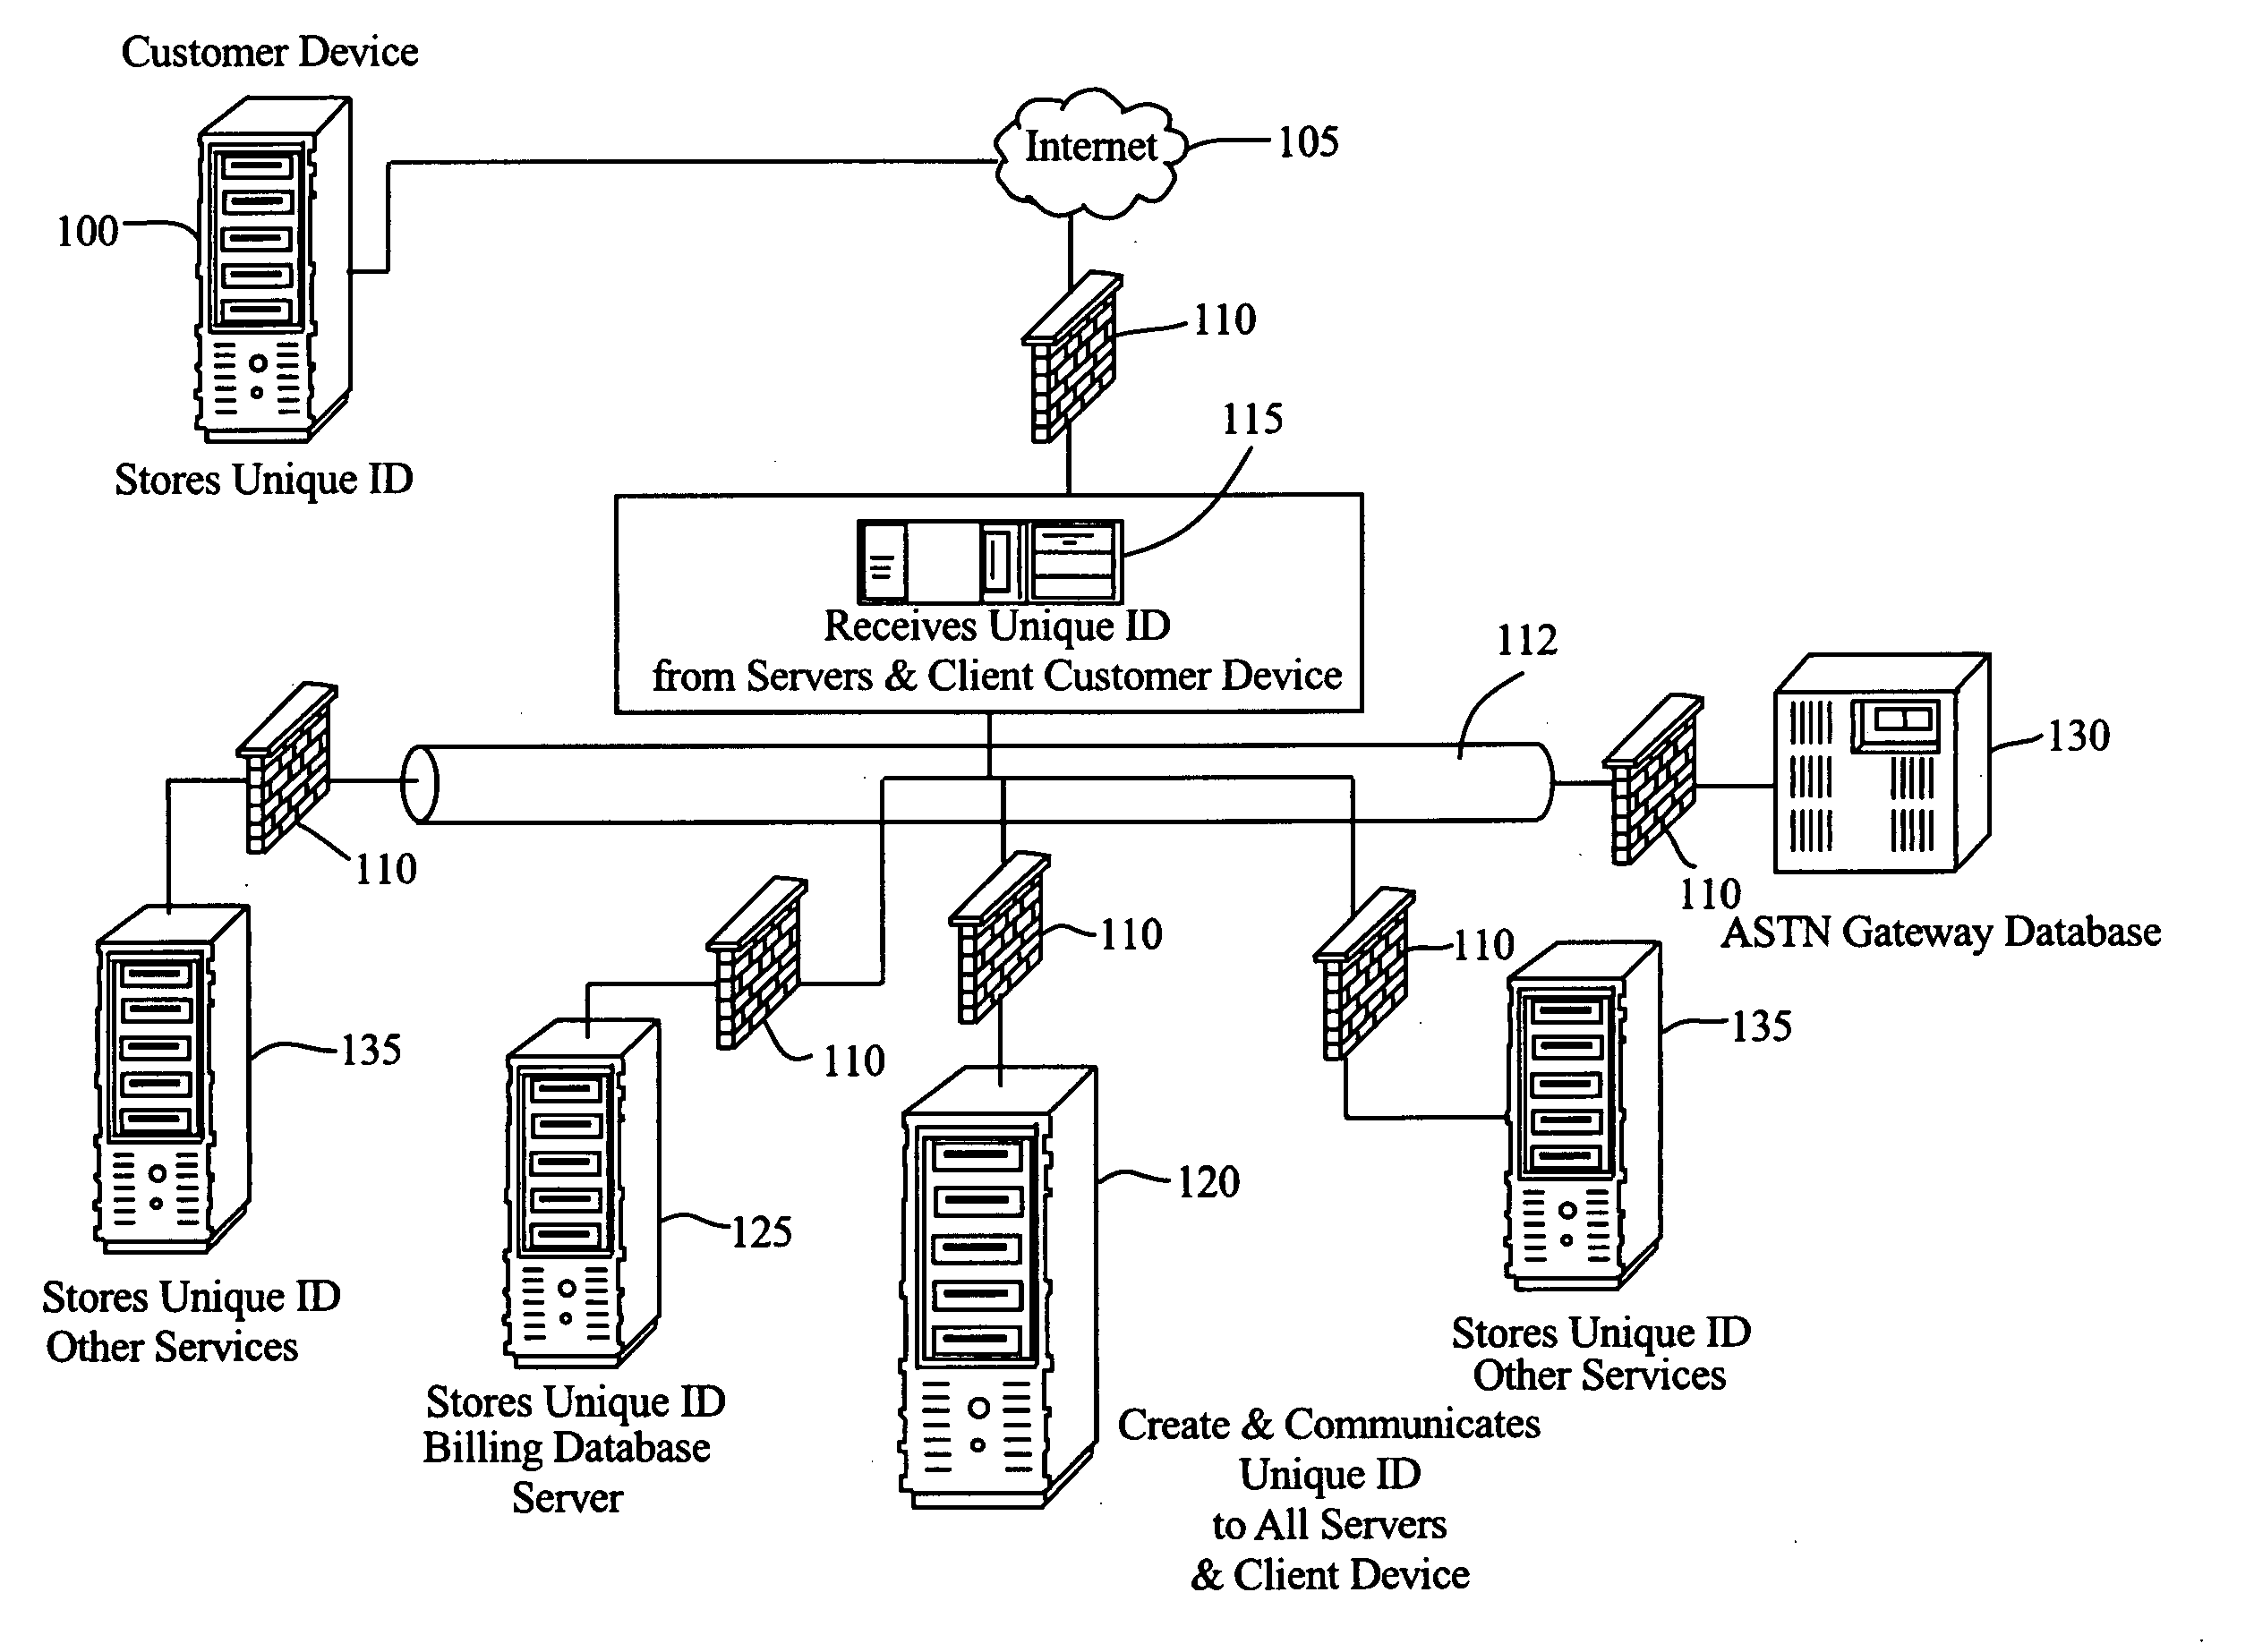 System for ubiquitous network presence and access without cookies